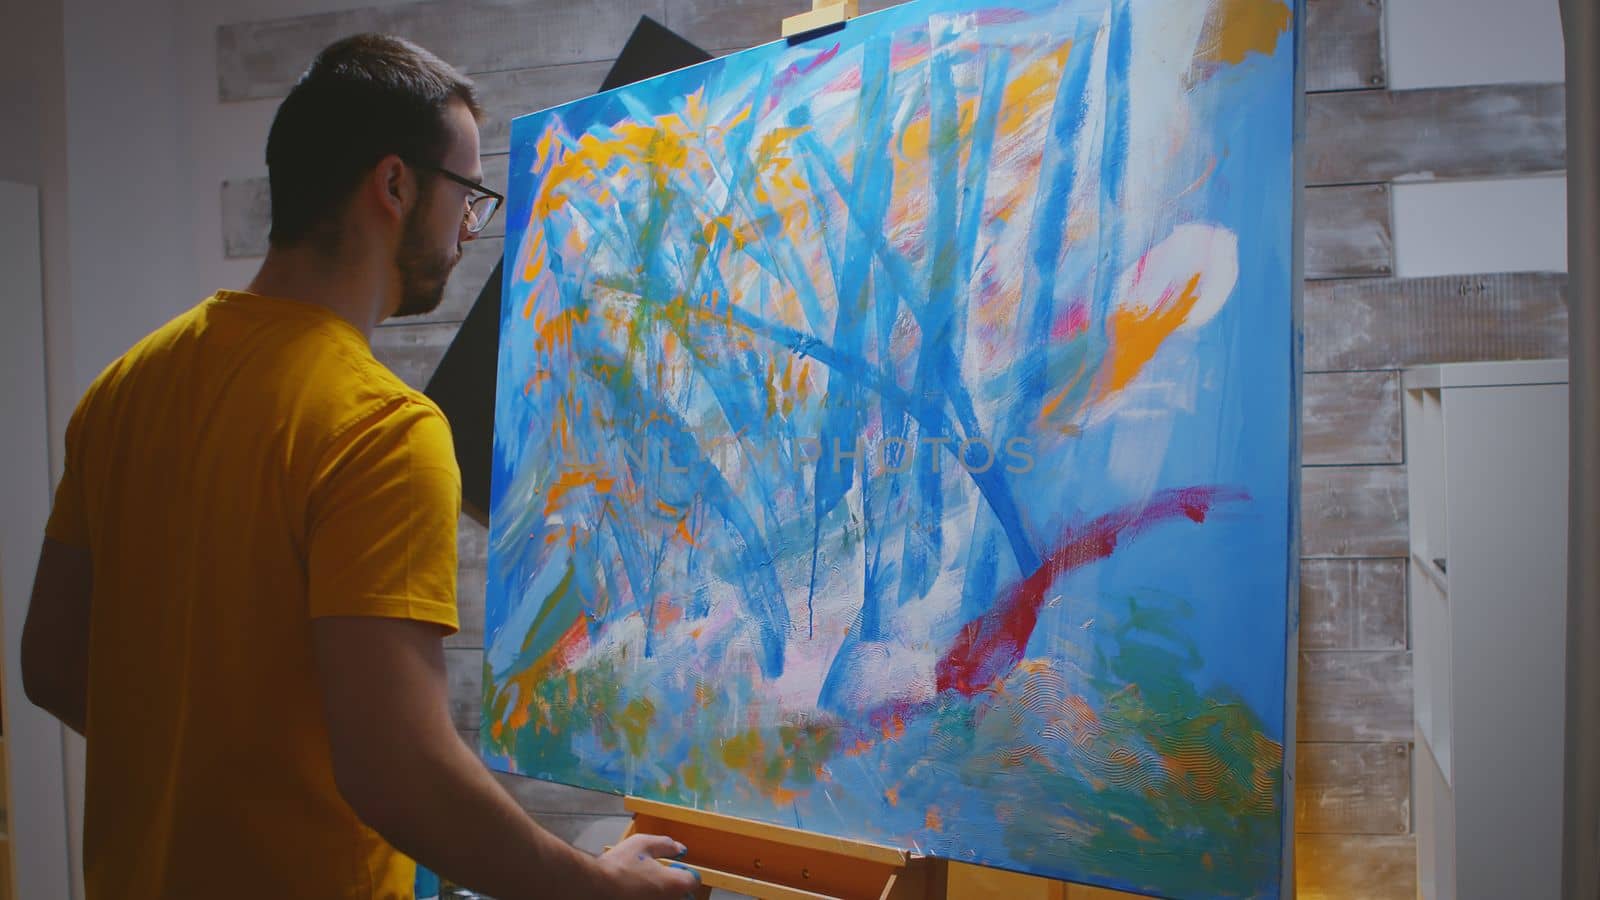 Artist paints on large canvas with fingertips in art studio.